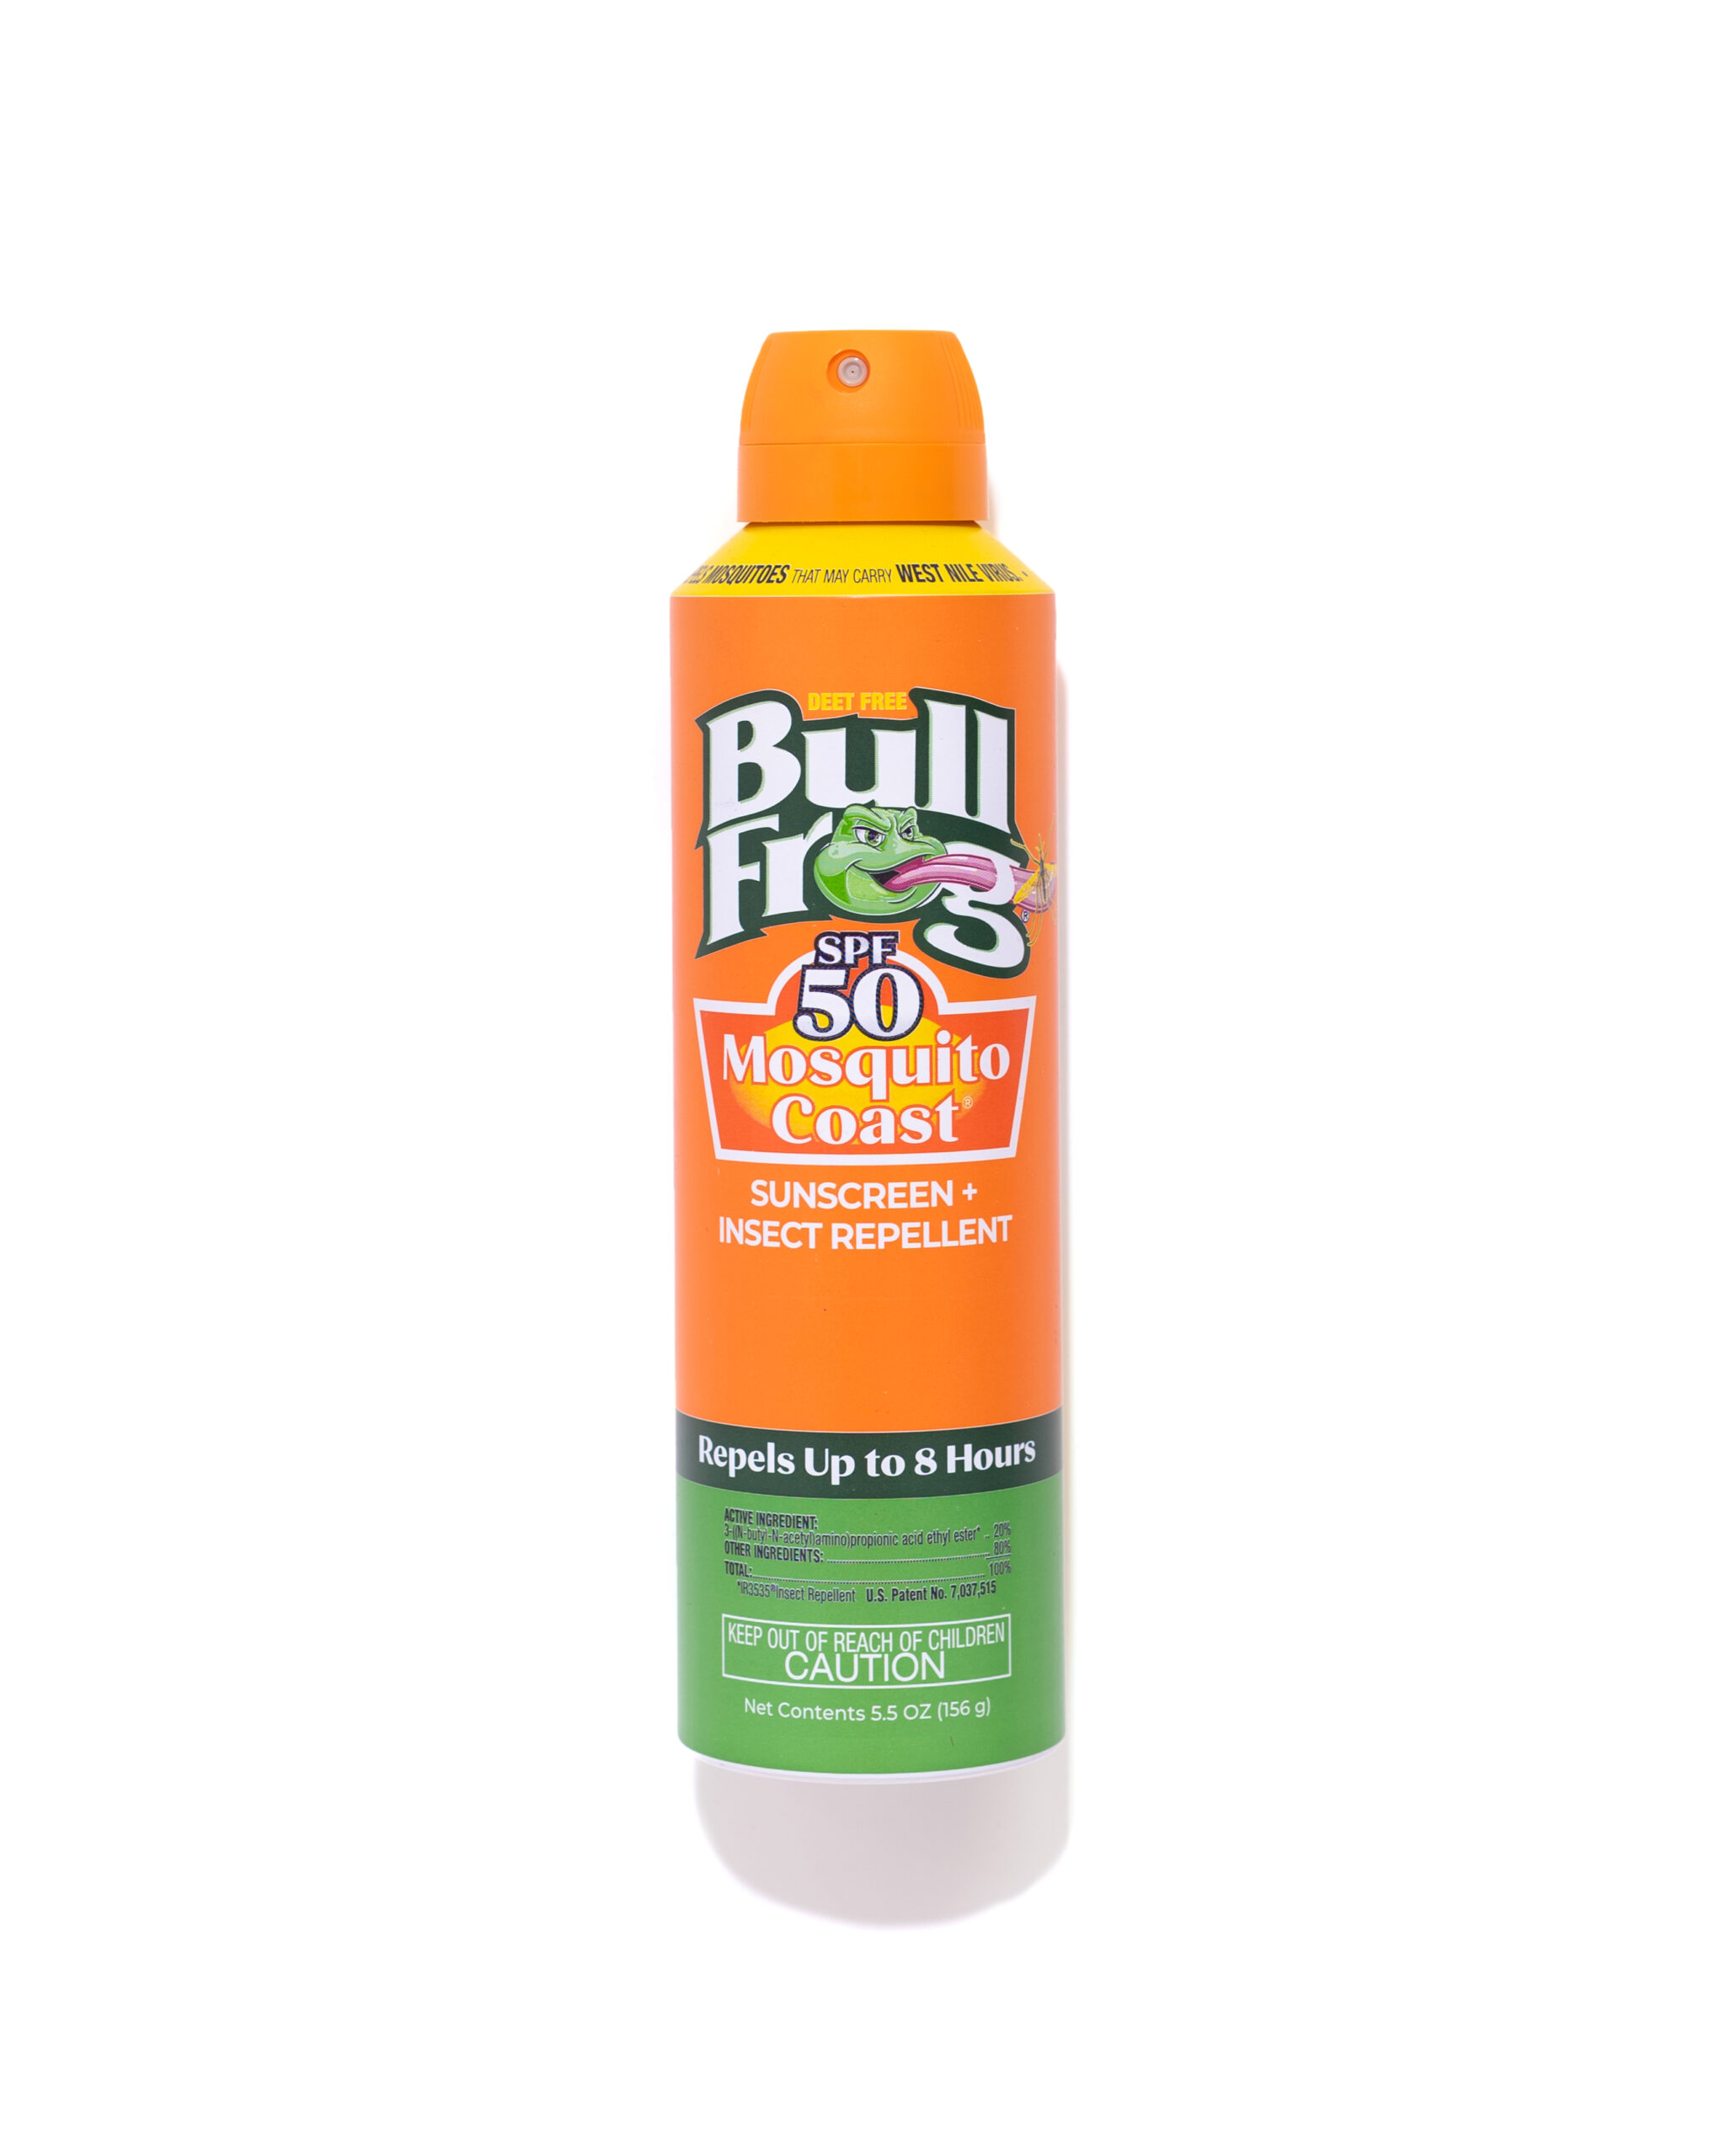 BULLFROG SUNSCREEN & INSECT REPELLENT - Sunscreen